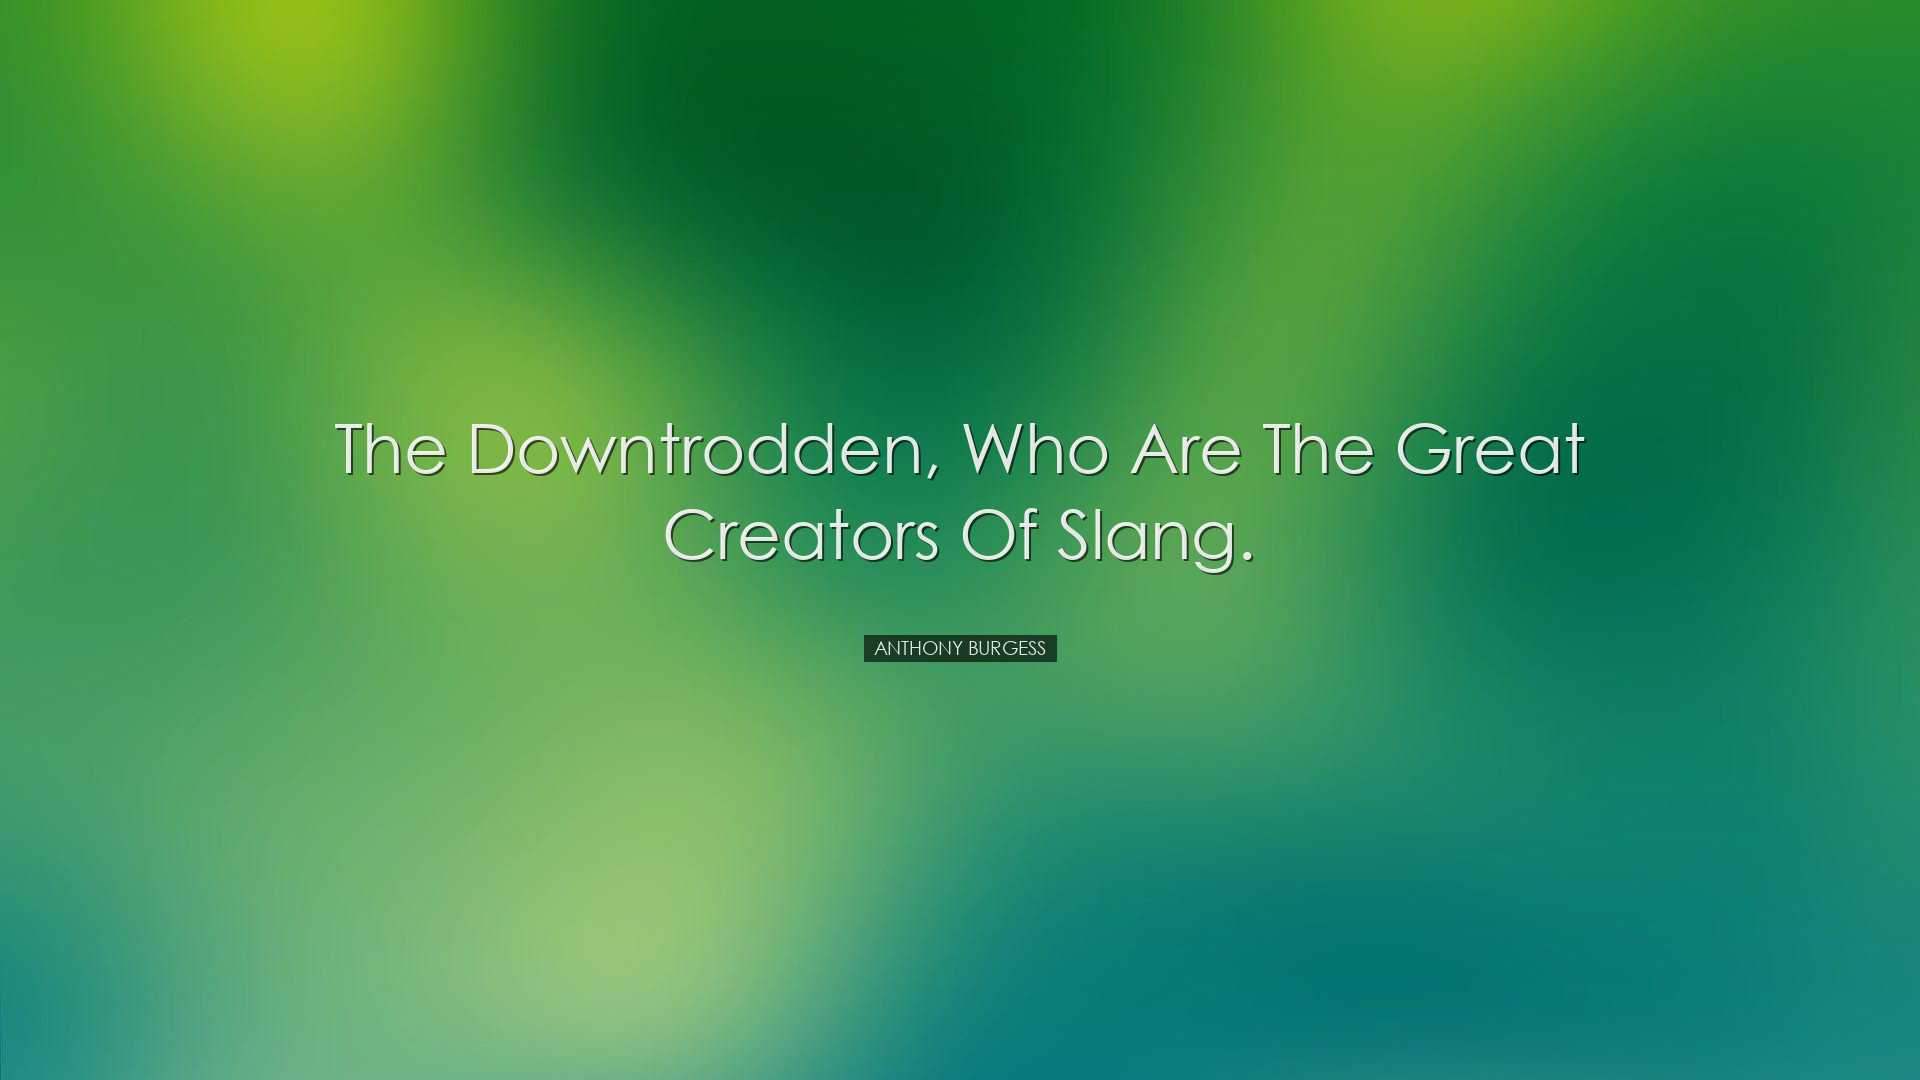 The downtrodden, who are the great creators of slang. - Anthony Bu